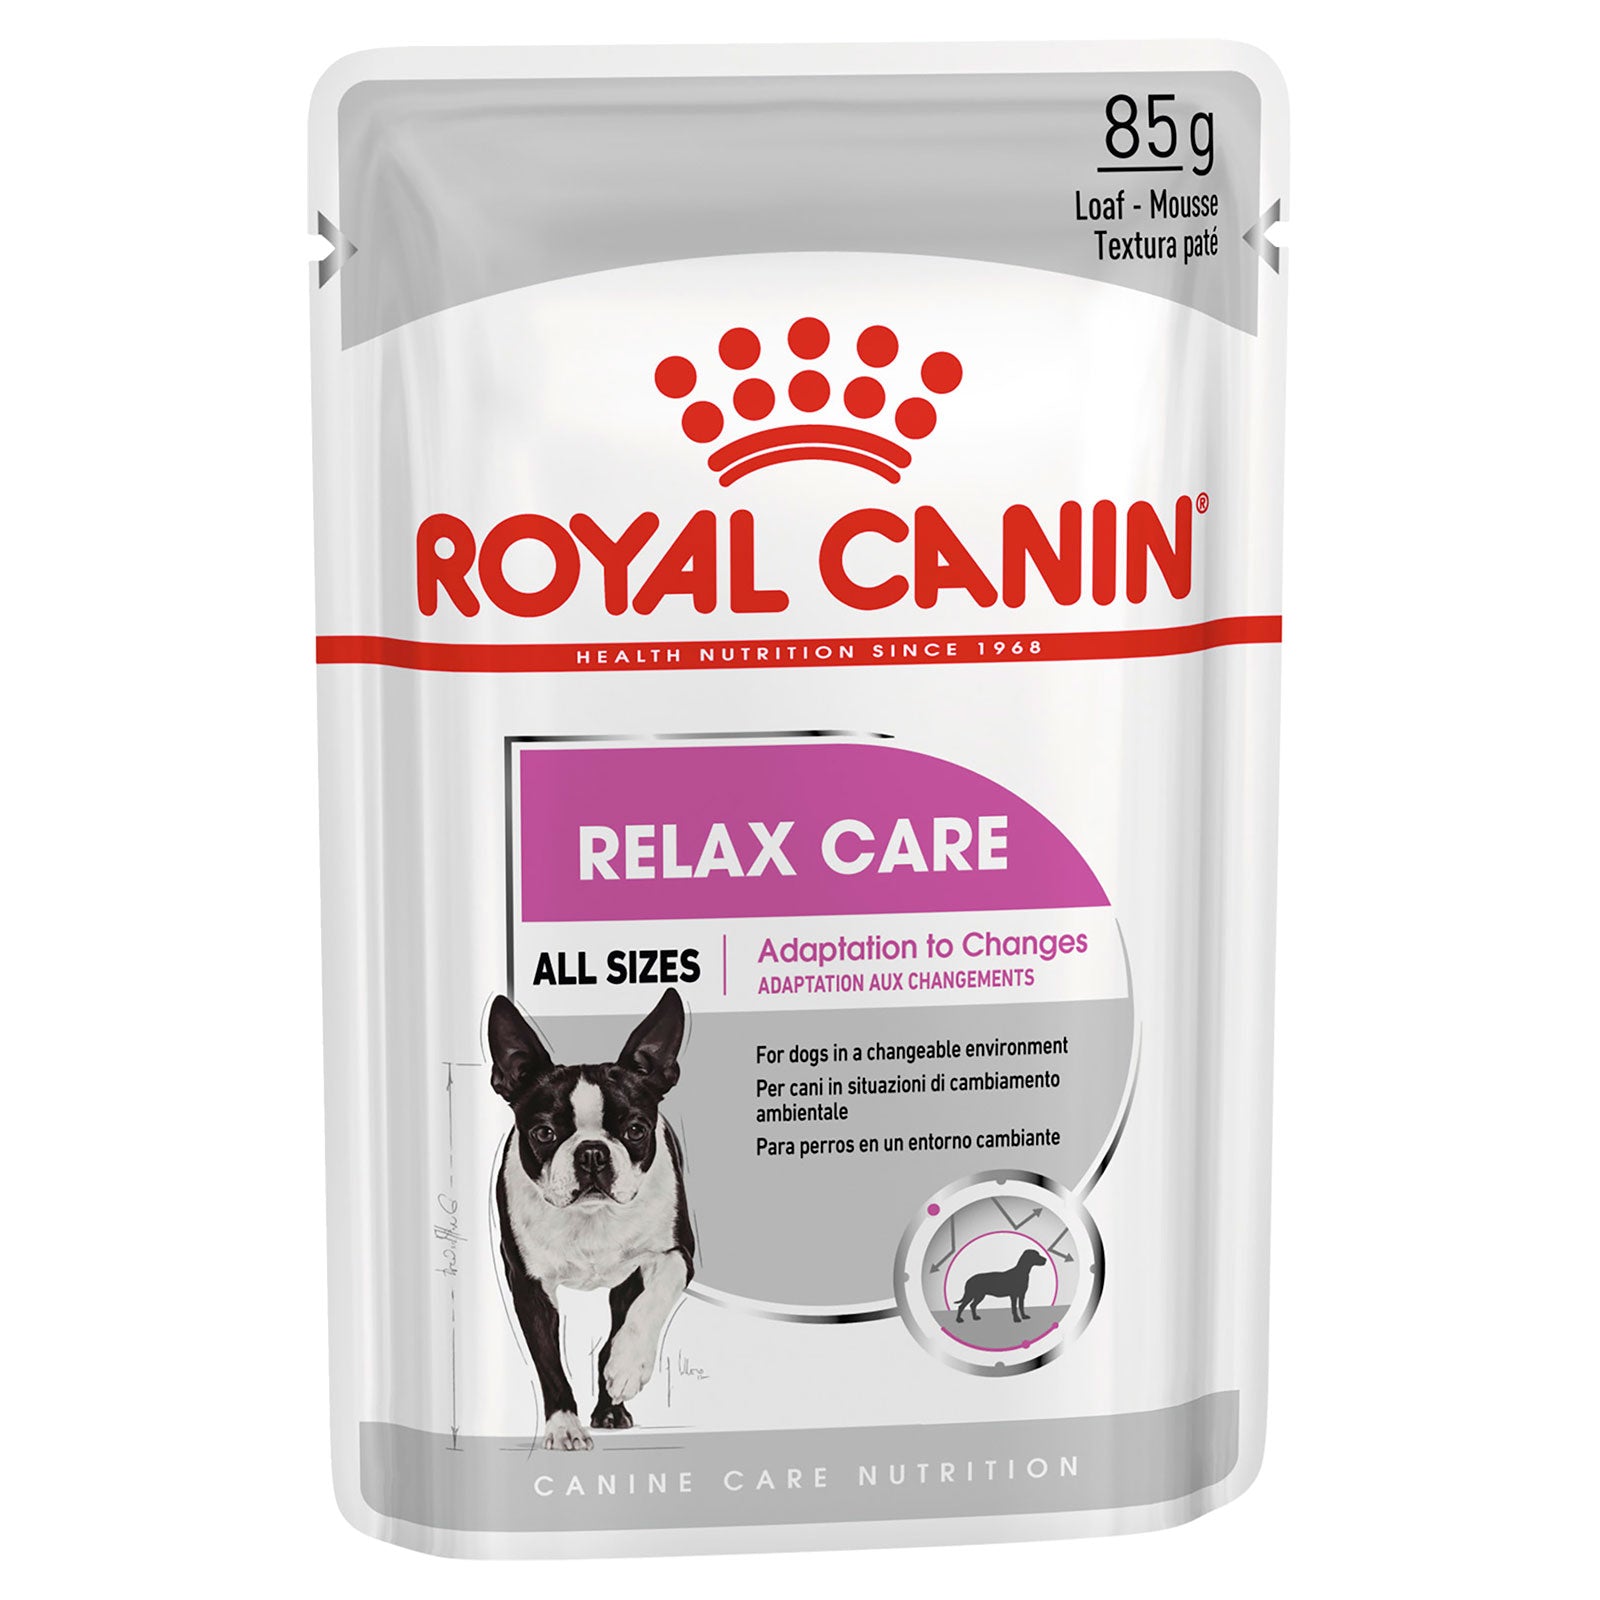 Royal Canin Dog Food Pouch Relax Care